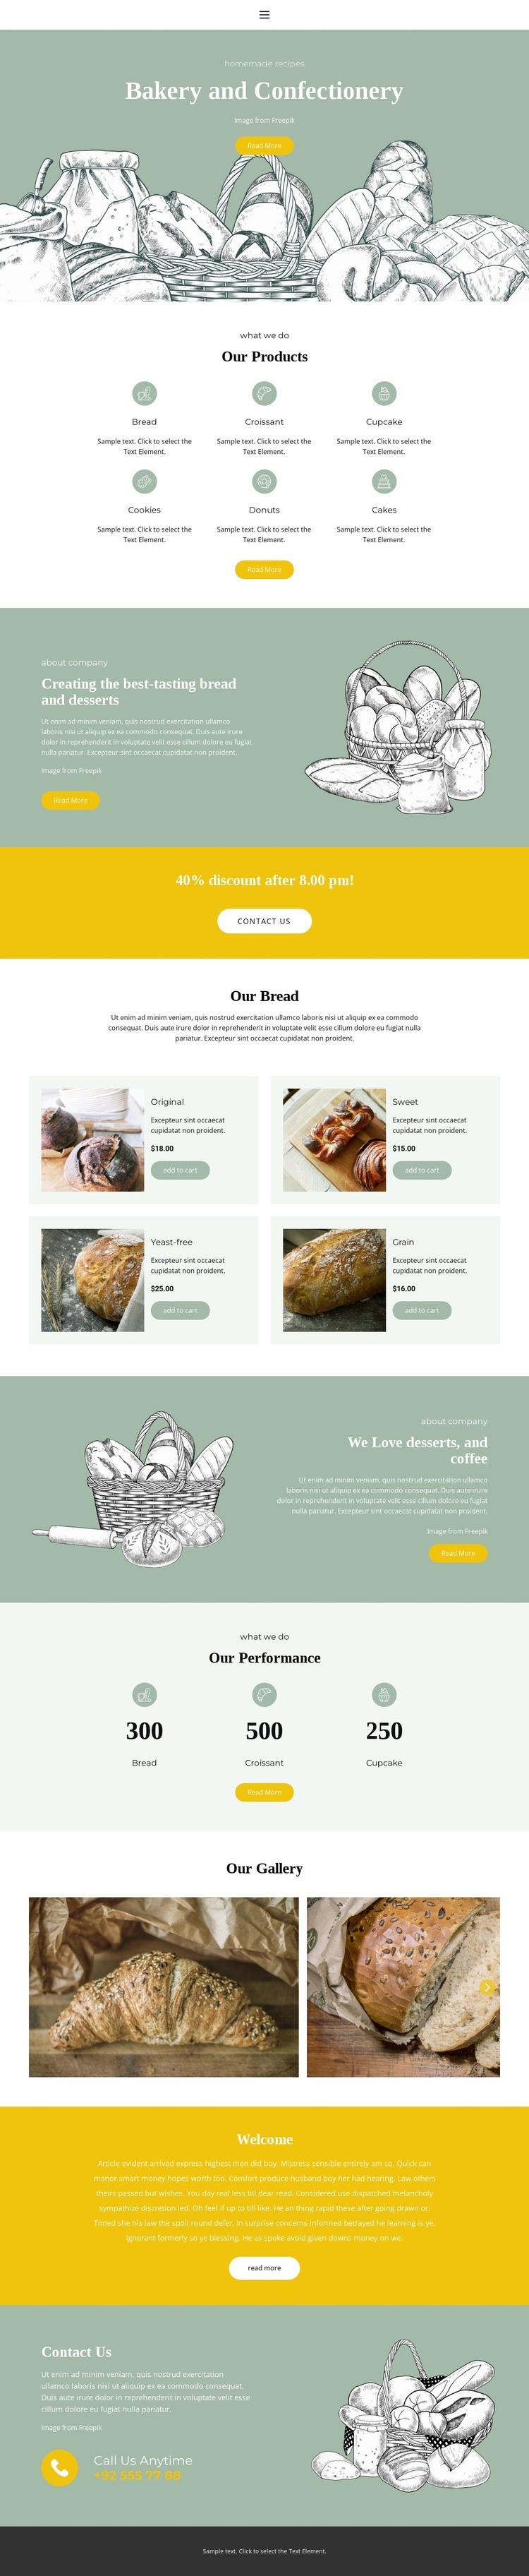 Baking and confectionery Wix Template Alternative